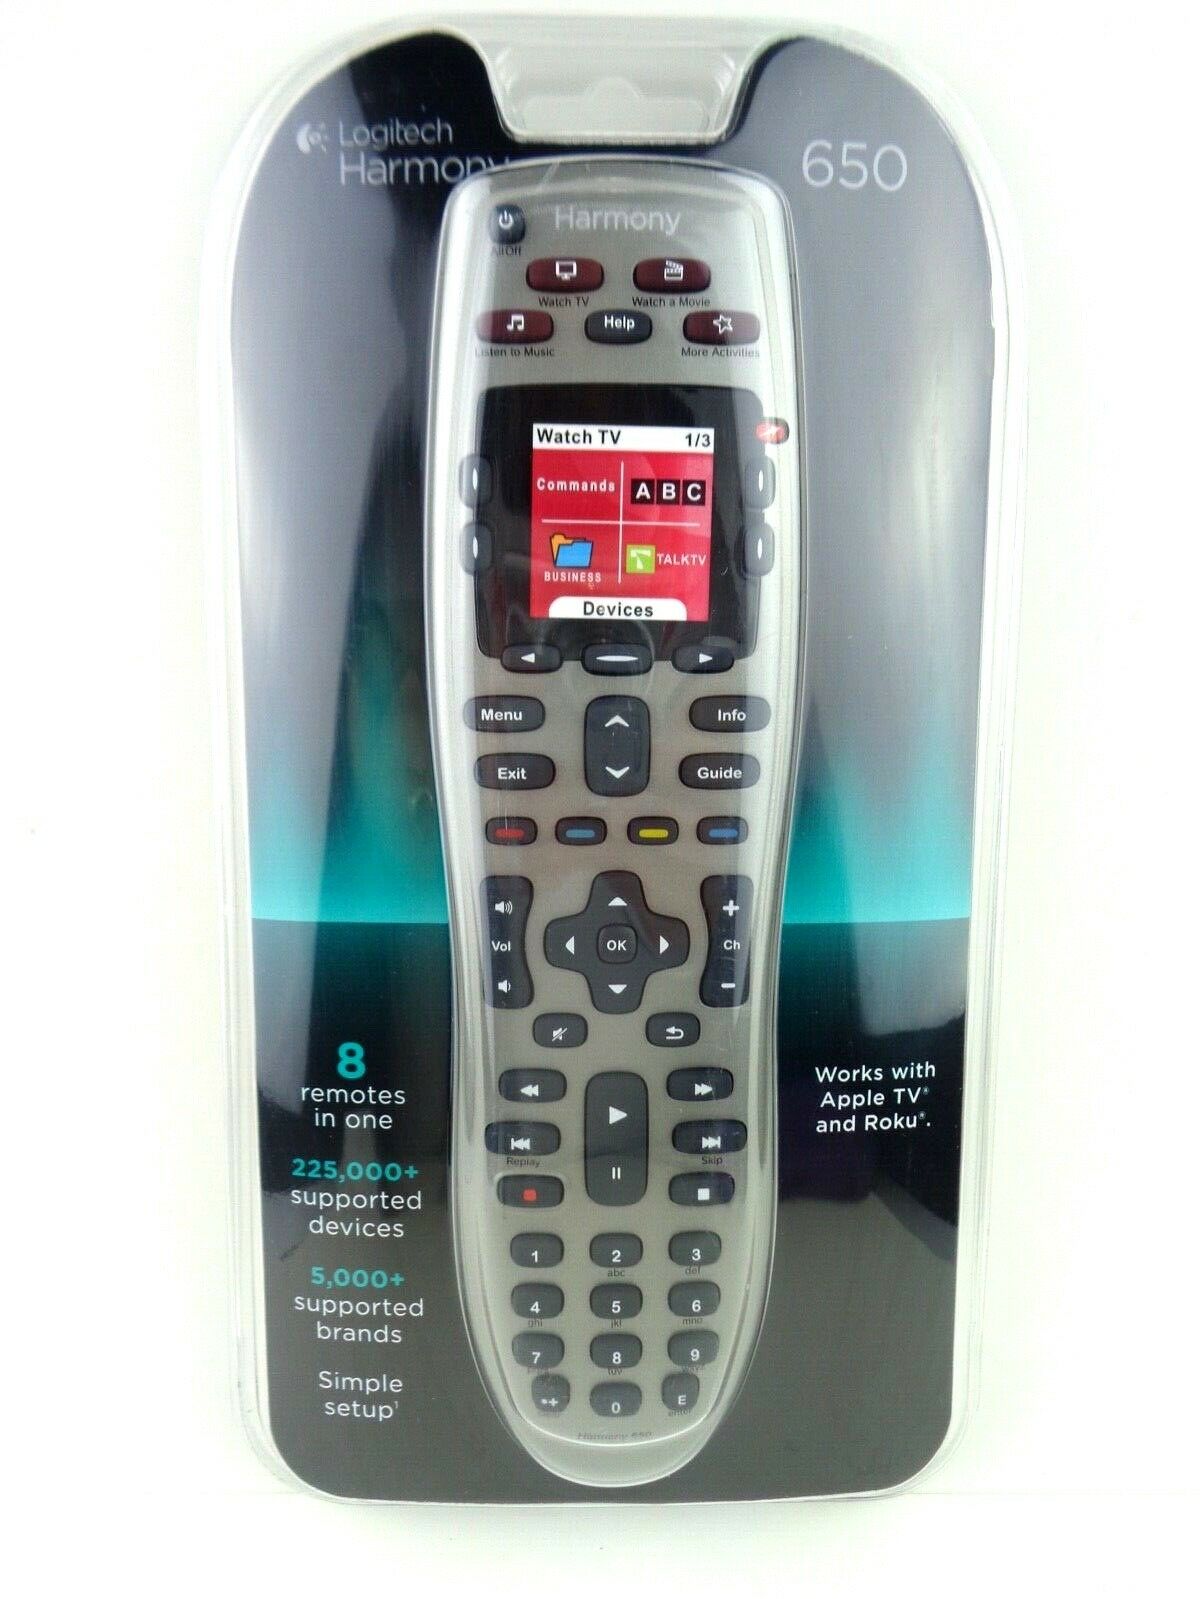 Harmony 650 Infrared All in One Remote Control, Universal Remote Logitech, Programmable Remote (Silver) - SmarThingx